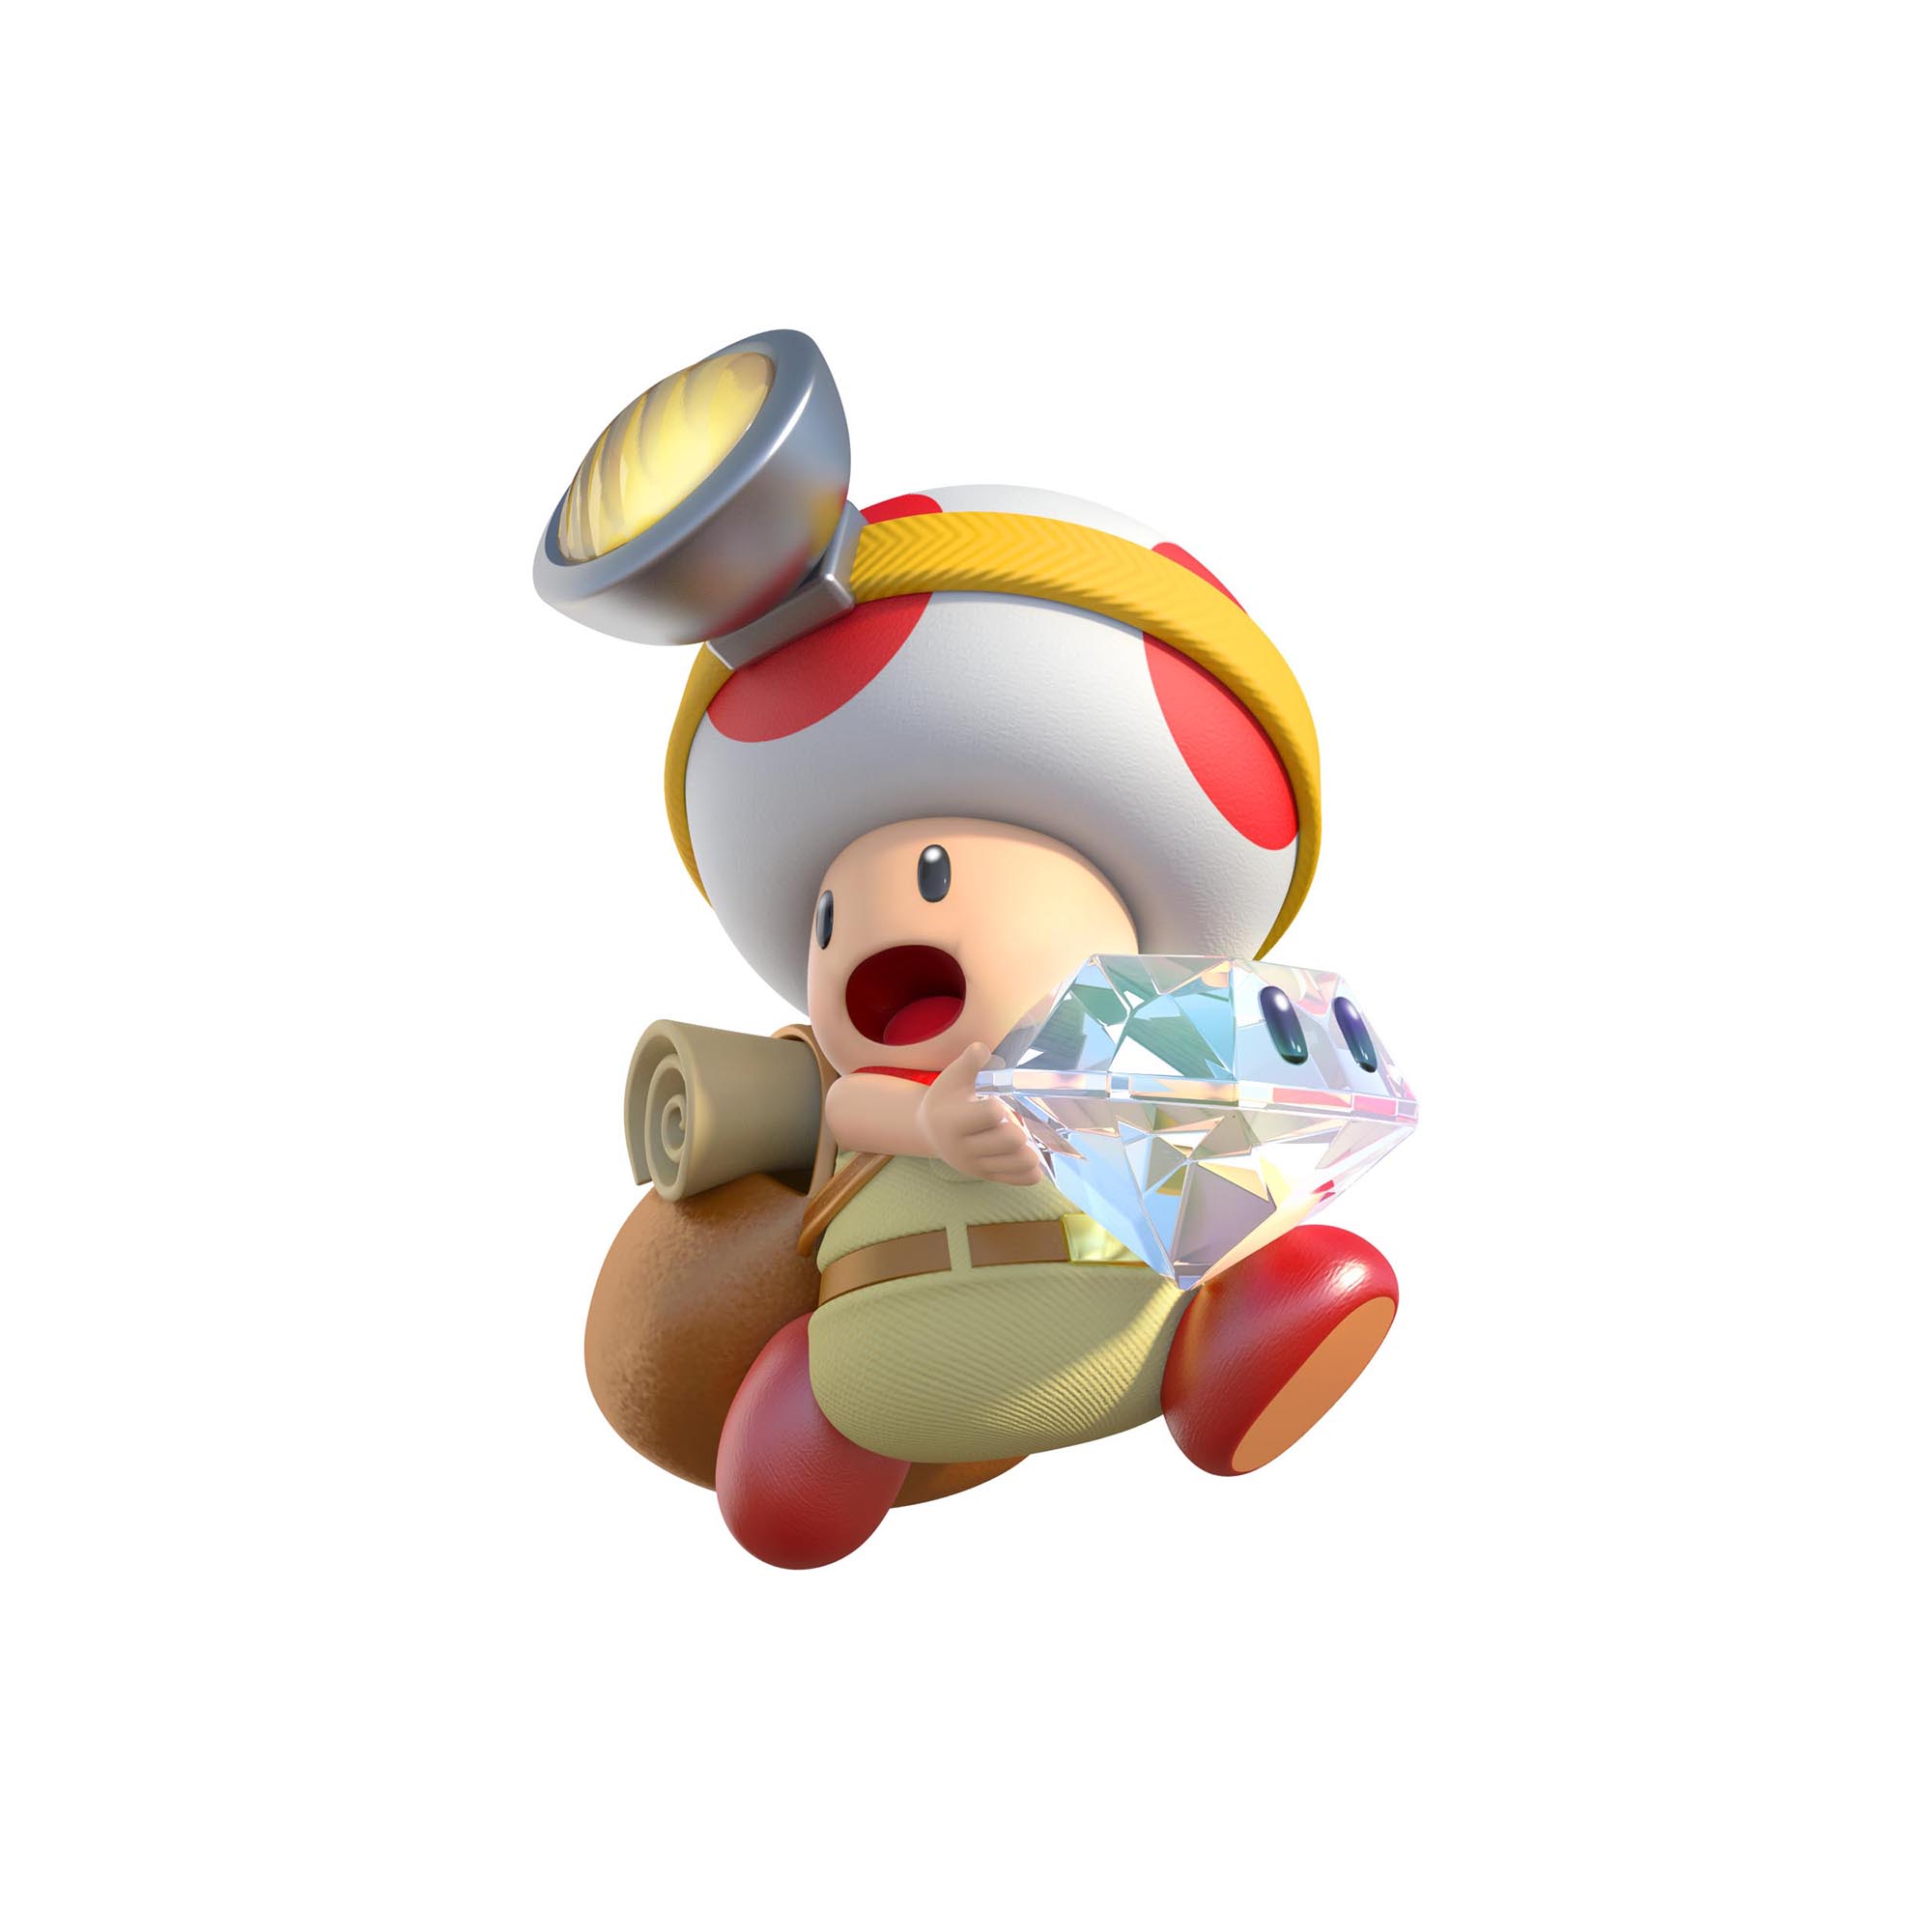 More Artwork From The Uping Captain Toad Treasure Tracker Has